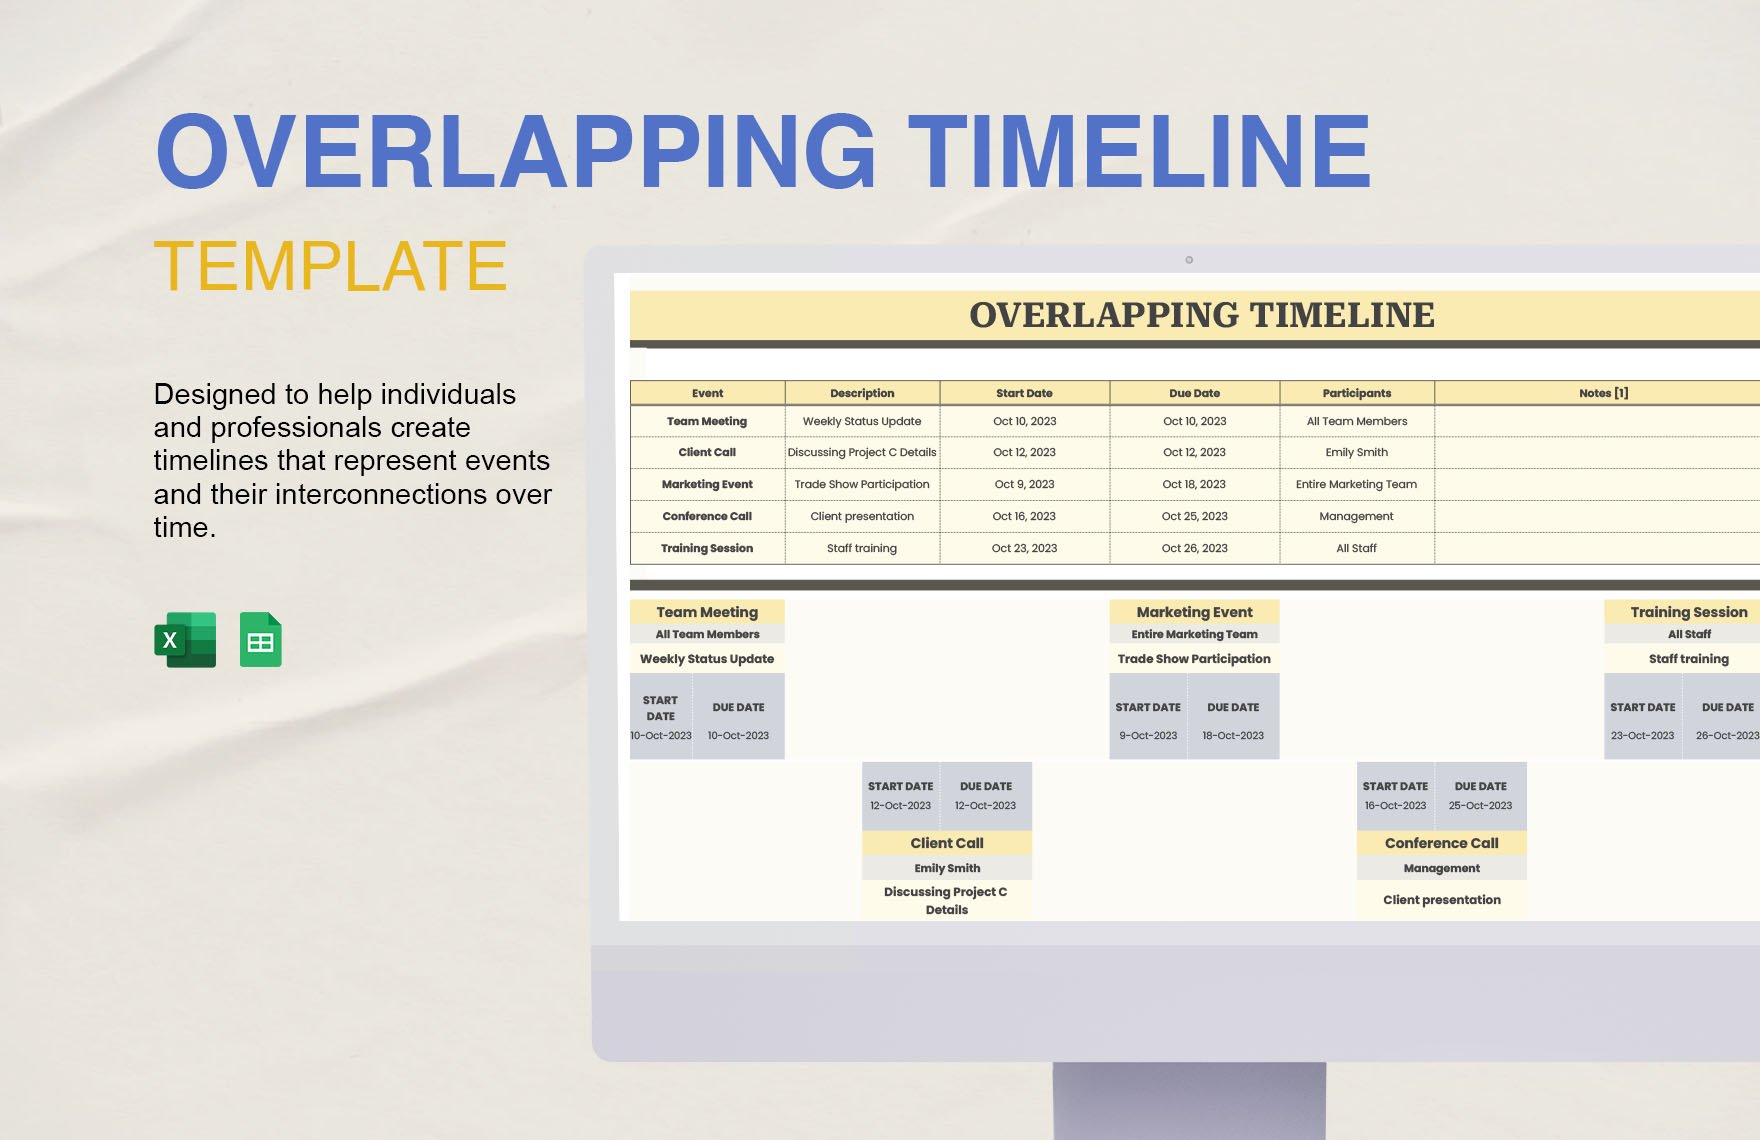 Overlapping Timeline Template